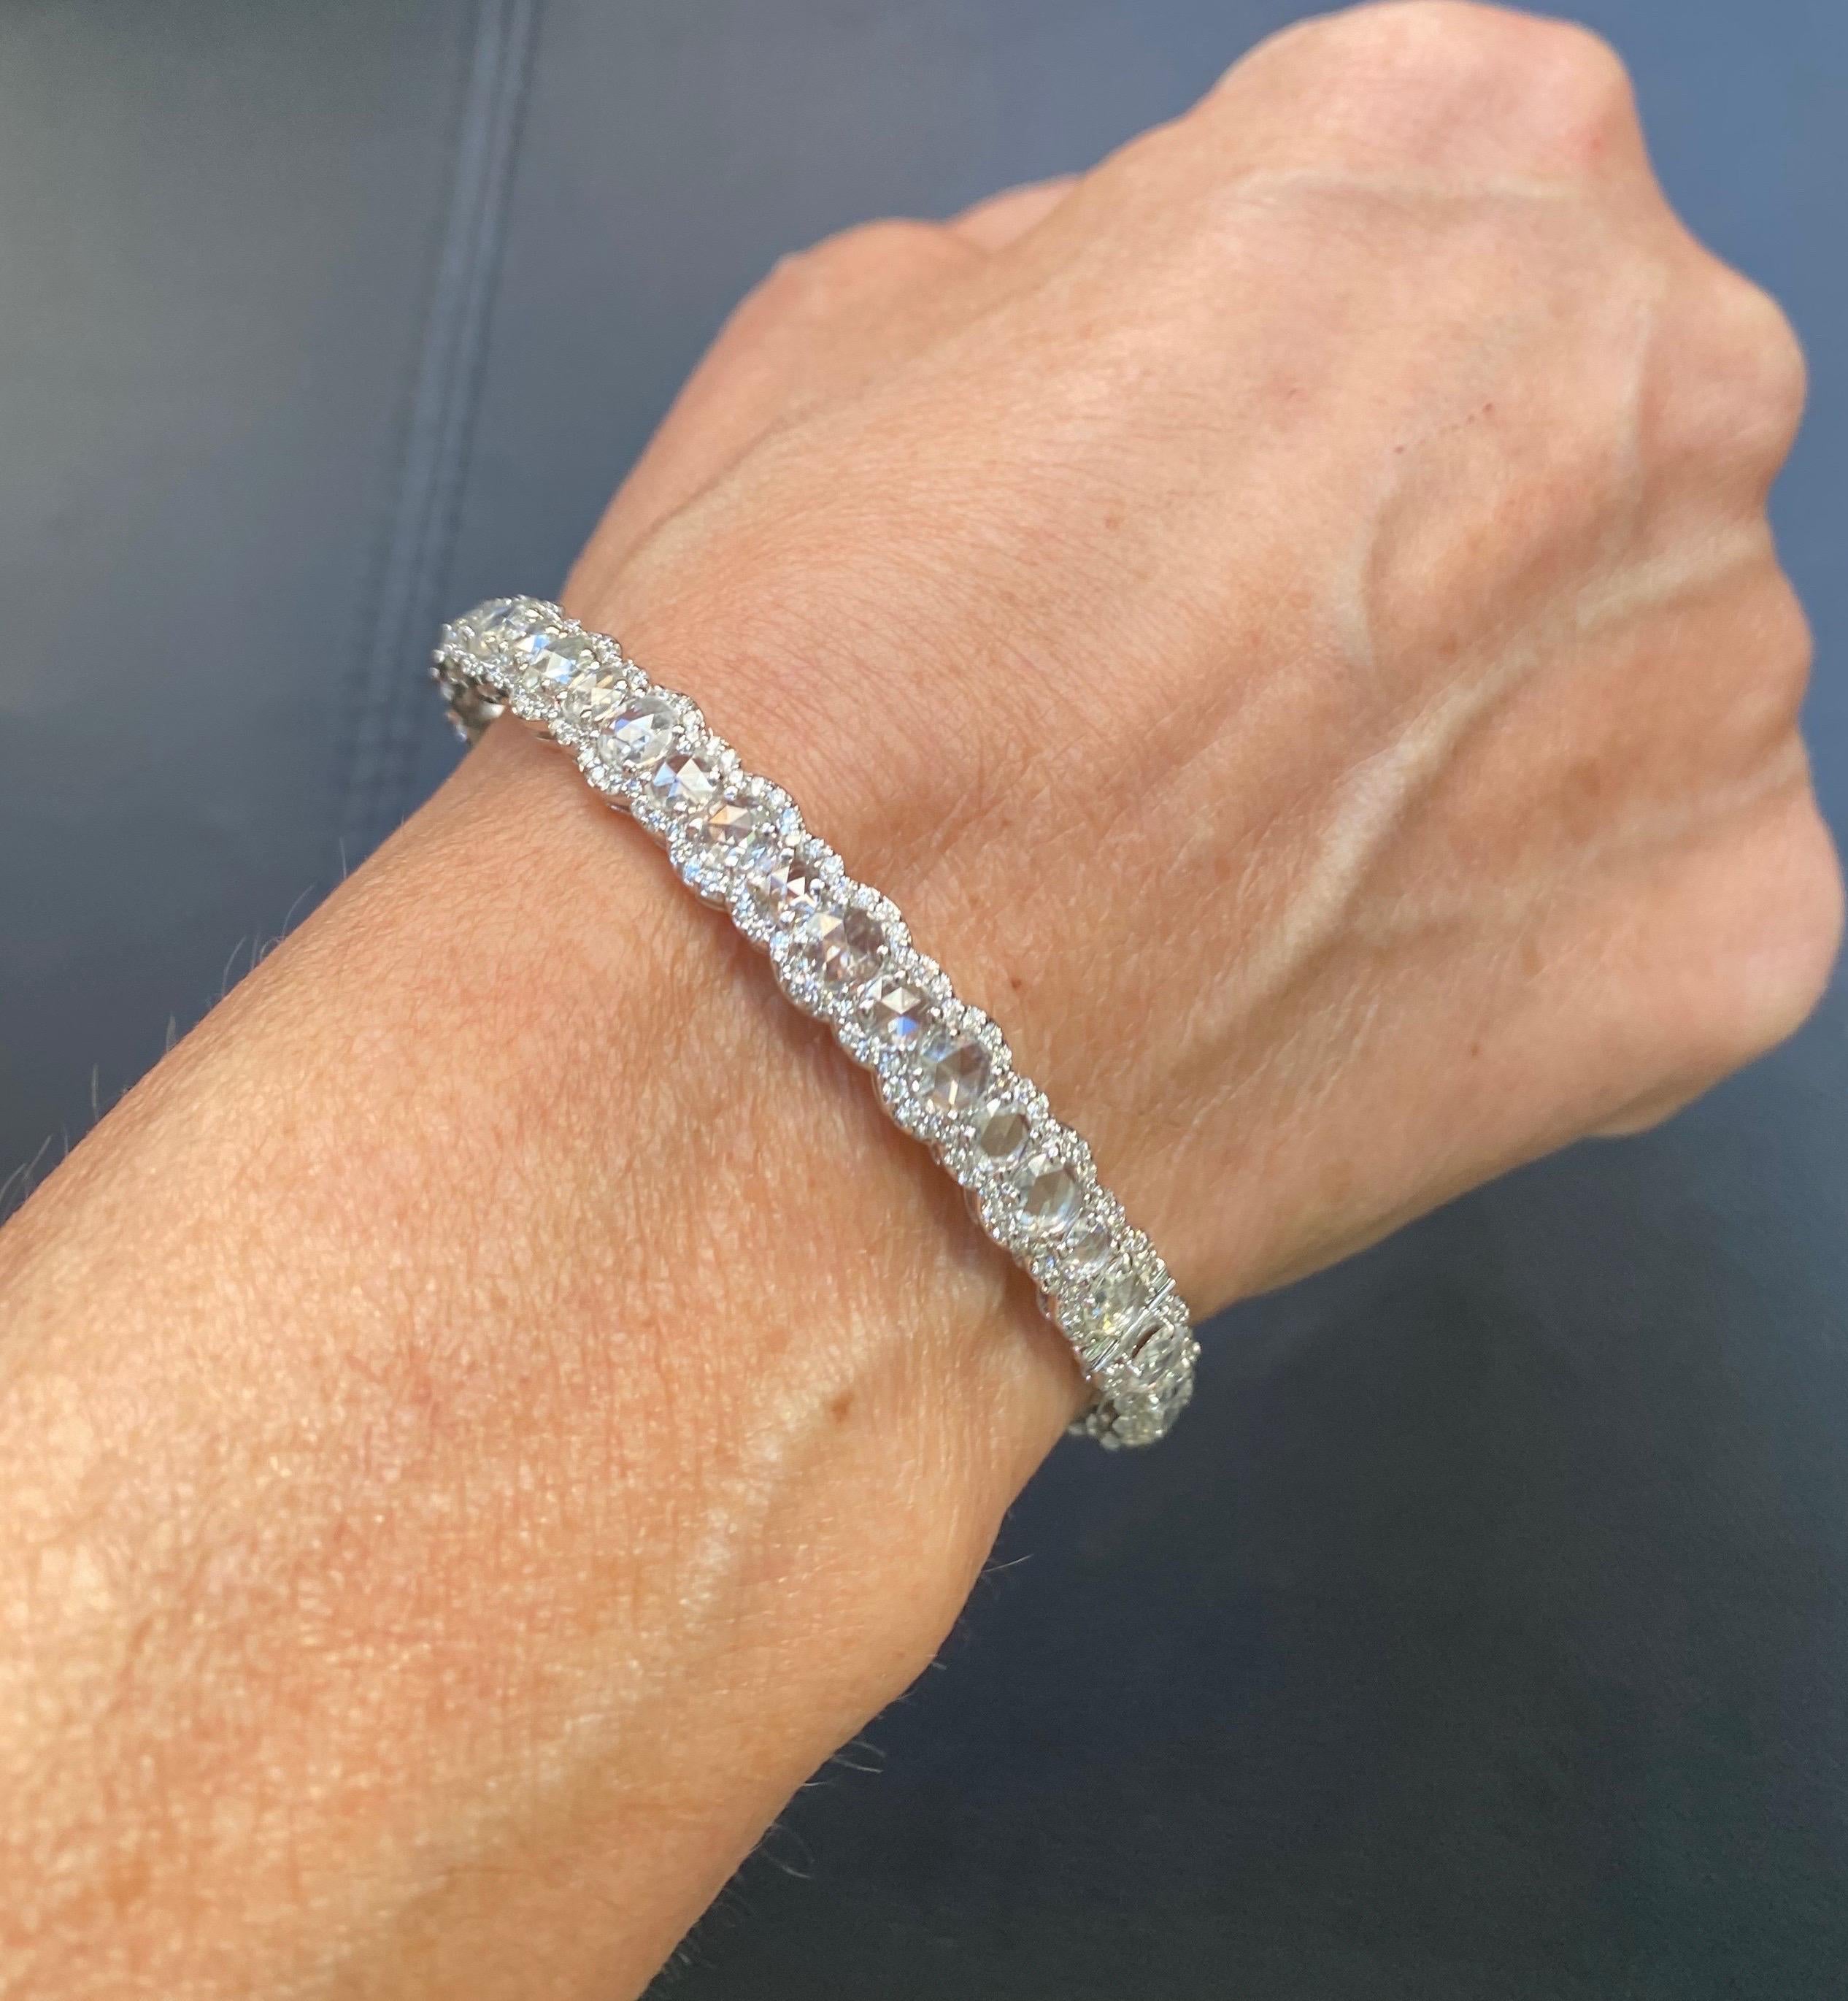 The tennis bracelet is a classic and timeless piece of jewelry that exudes elegance and sophistication. This particular bracelet is crafted from 18k white gold, a lustrous and durable precious metal known for its clean and modern look.

The bracelet